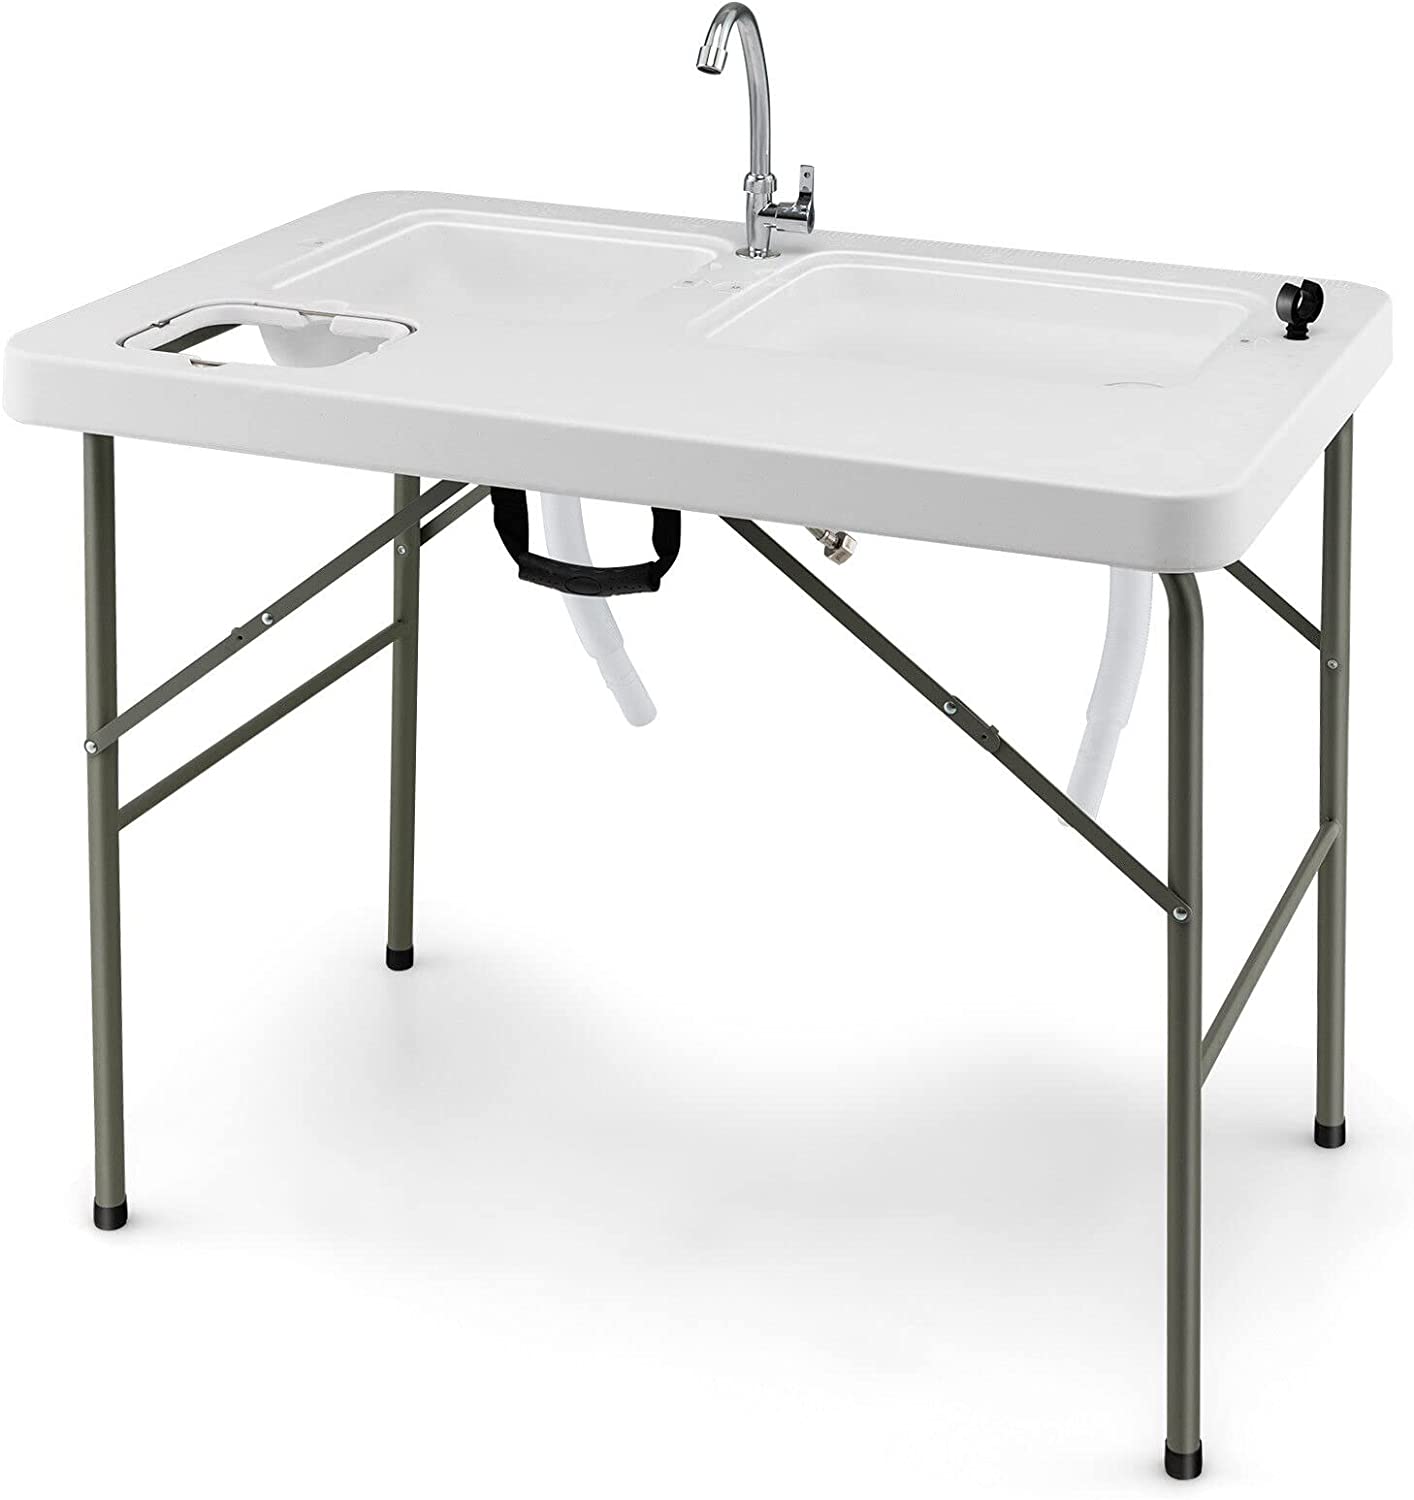 Giantex Fish Cleaning Table with 2 Sinks, Faucet, Garage Holder, Portable Folding Camping Table with Measuring Mark